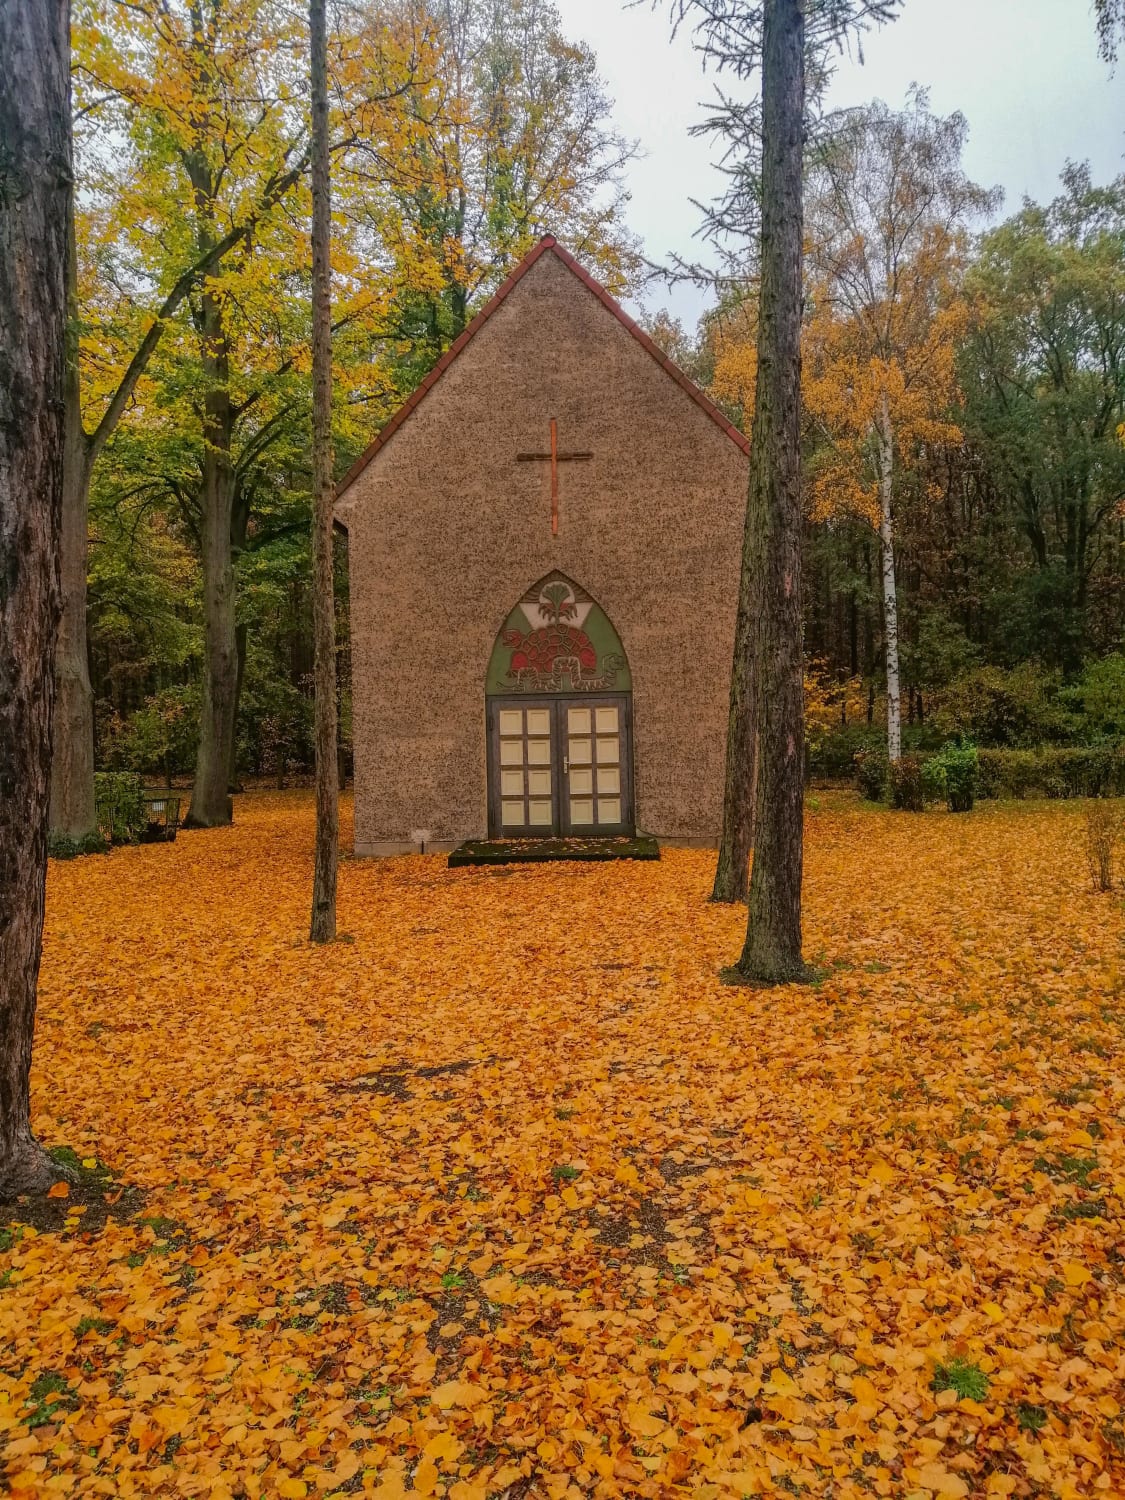 Accidentally stumbled upon this small church in the woods of Brandenburg, Germany